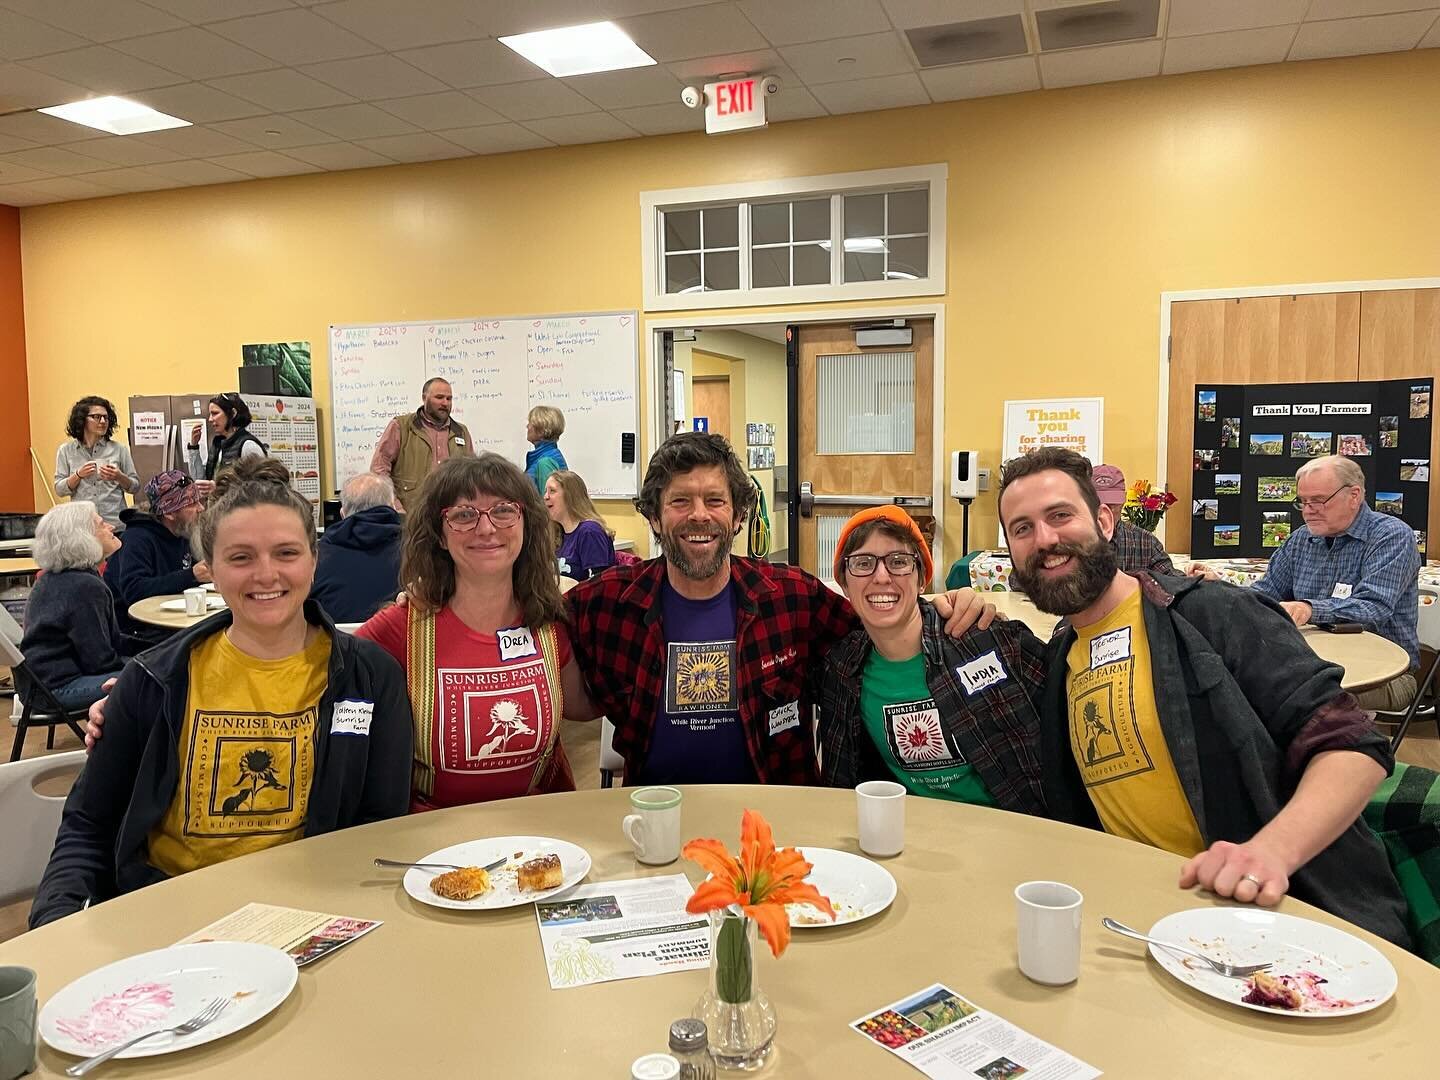 Yesterday we got to have breakfast with a bunch of really cool farmers and the amazing Willing Hands Team at the Listen Dining Hall. A fun way to get together and kick off a new season! Thank you Willing Hands for all that you do! We feel honored to 